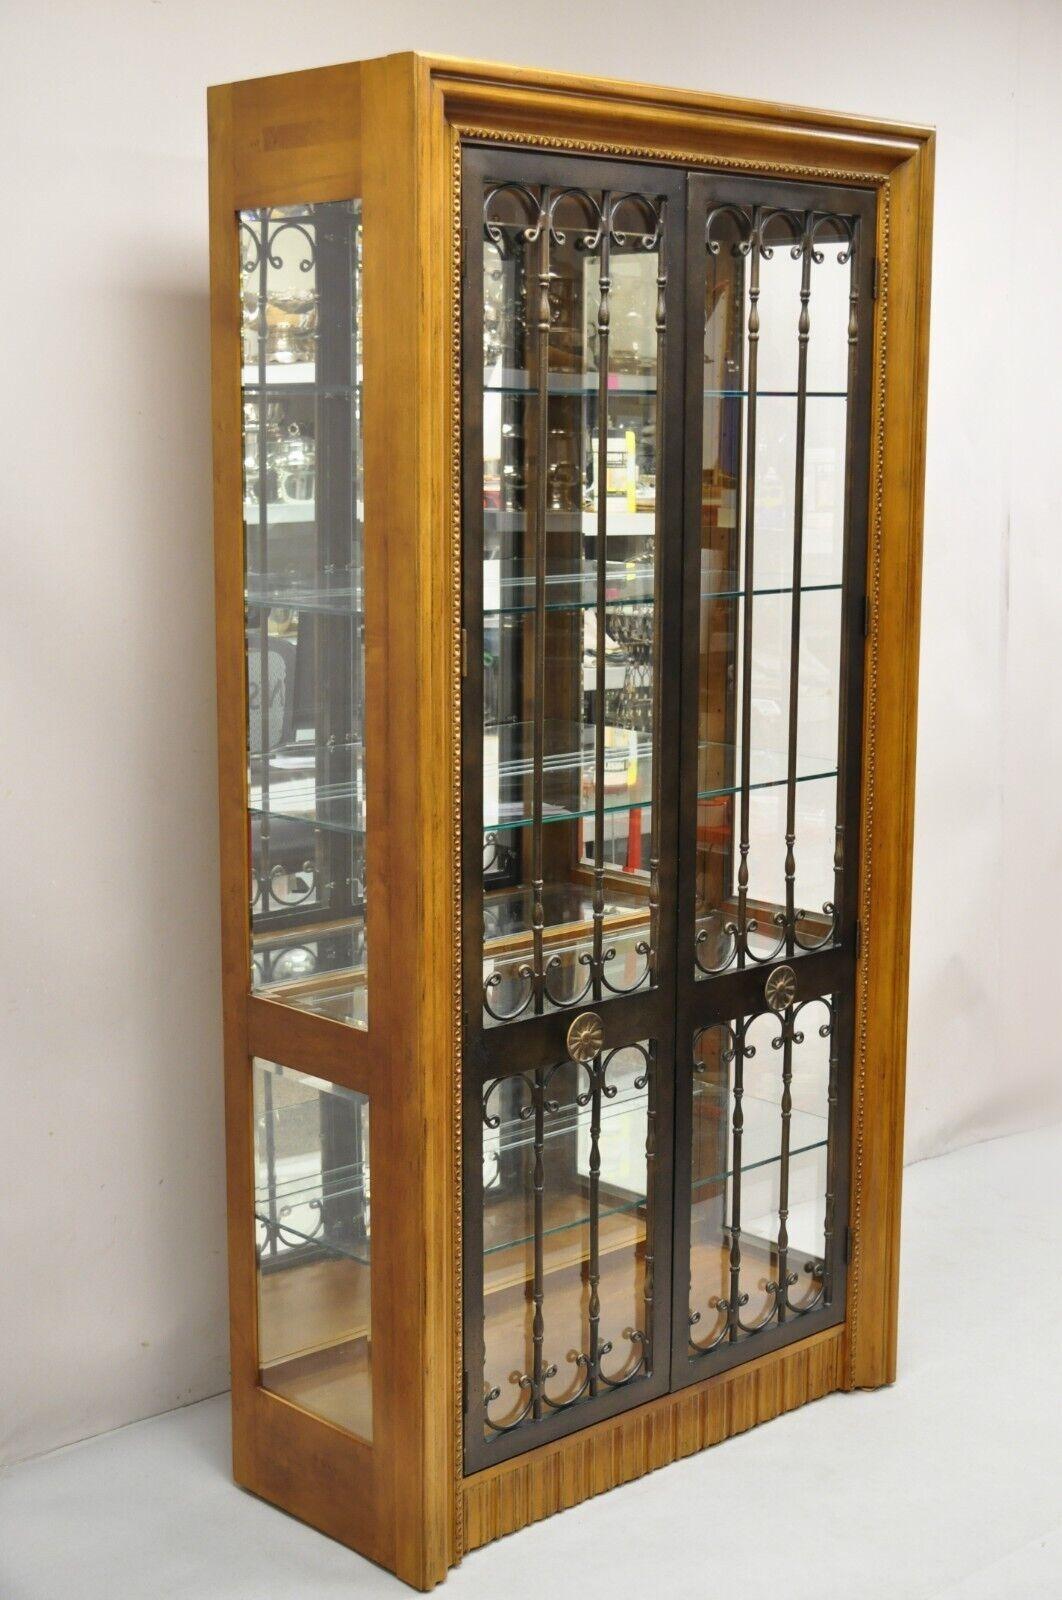 Bernhardt 354-356 Modern Cherry Wood & Iron Door Mediterranean Modern Lighted Curio China Display Cabinet. Item features Mirror back, ornate iron doors, touch light with 3 illumination settings, 4 adjustable glass shelves and 1 fixed glass shelf,